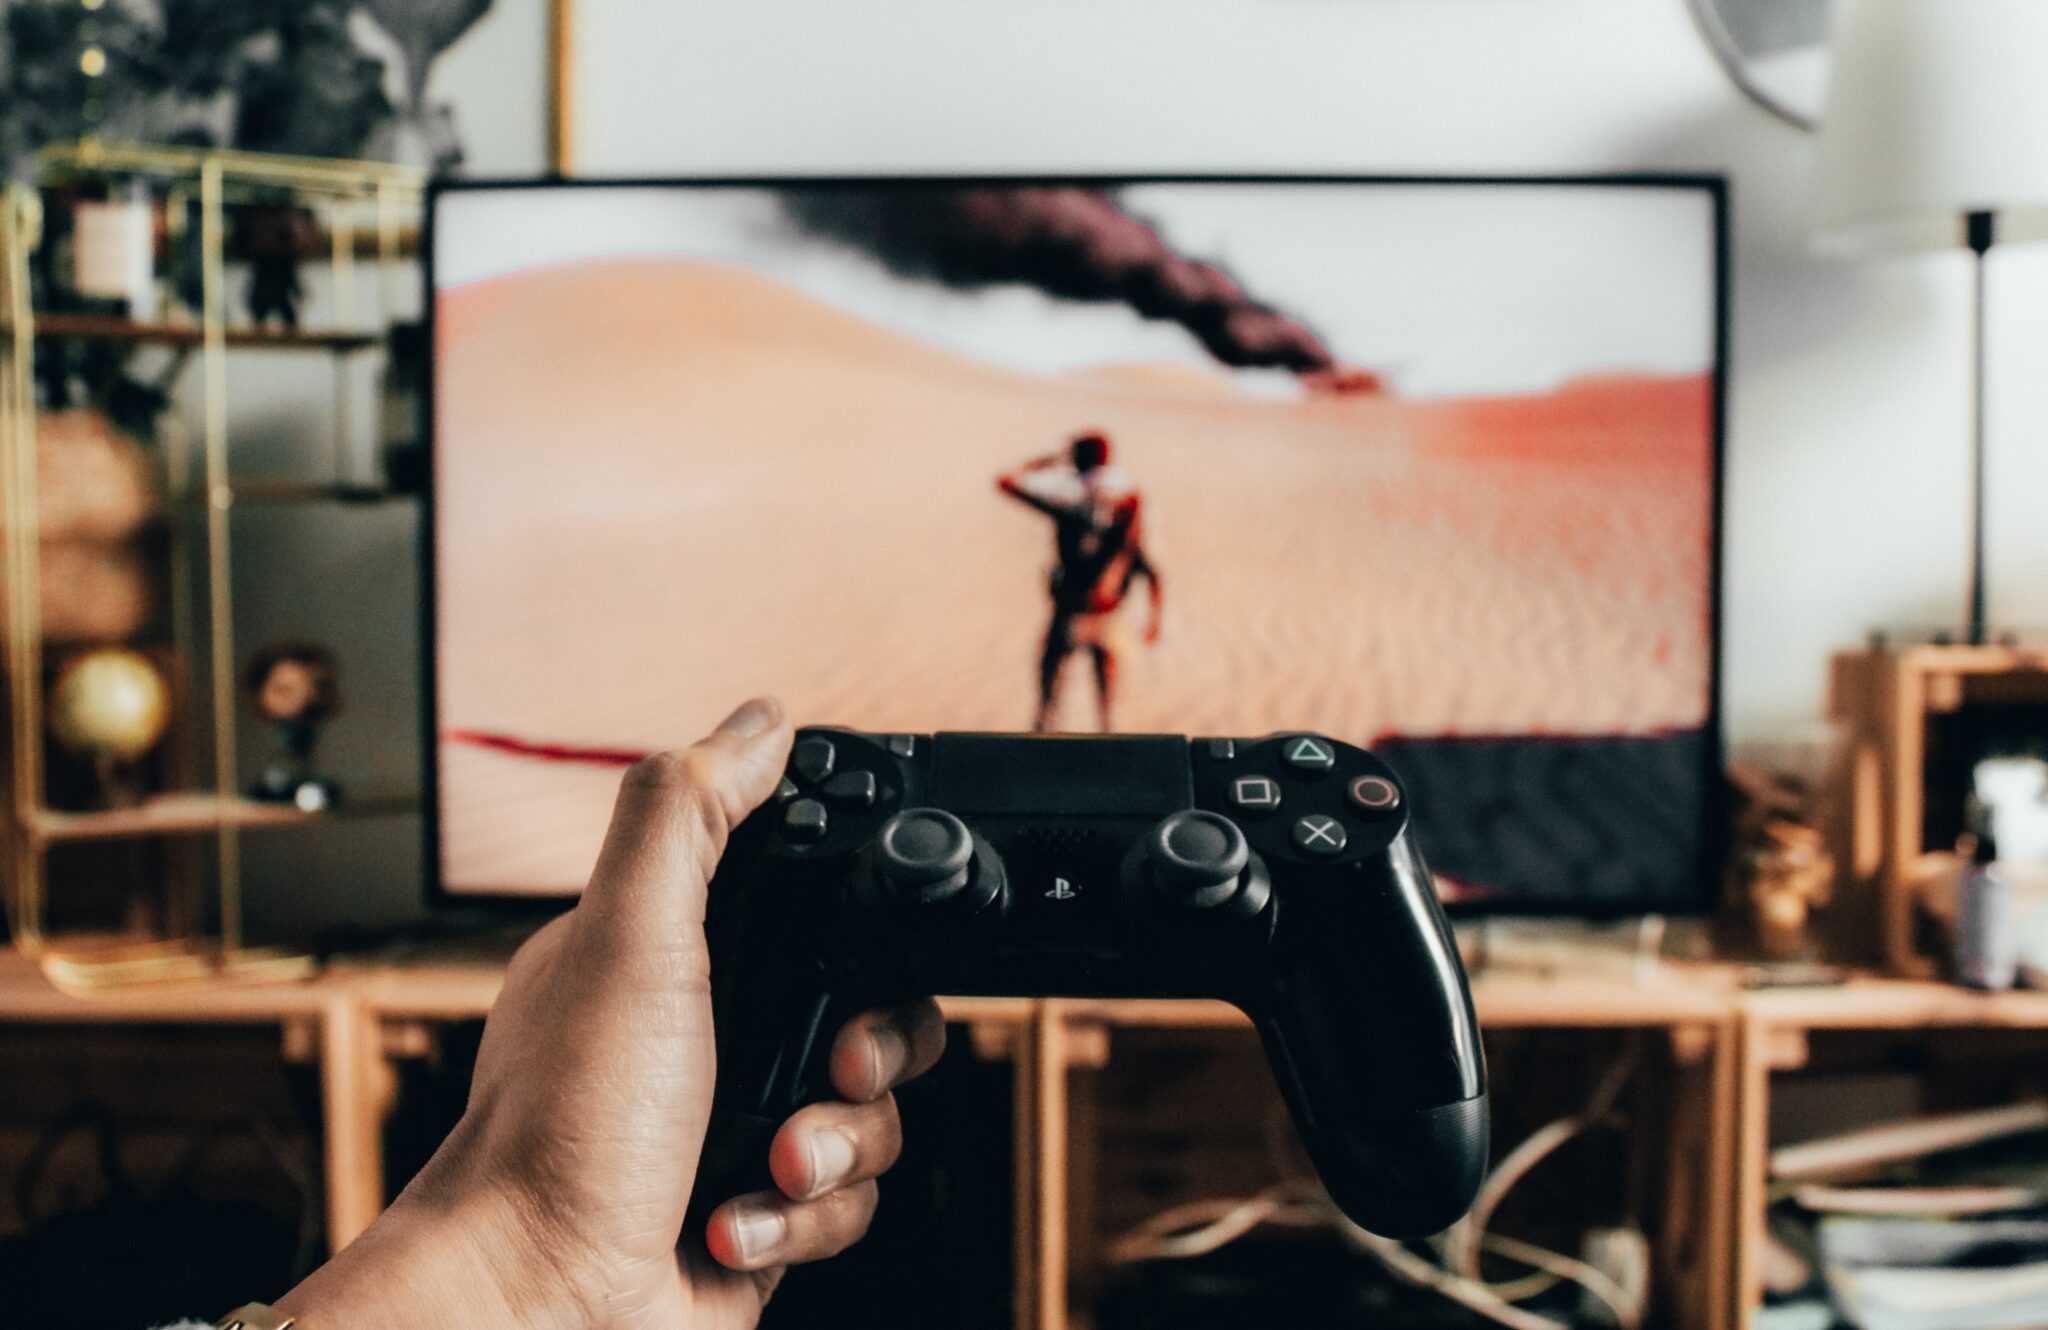 A hand holding a Playstation controller and playing Mad Max.

Video game localisation is an important part of the industry